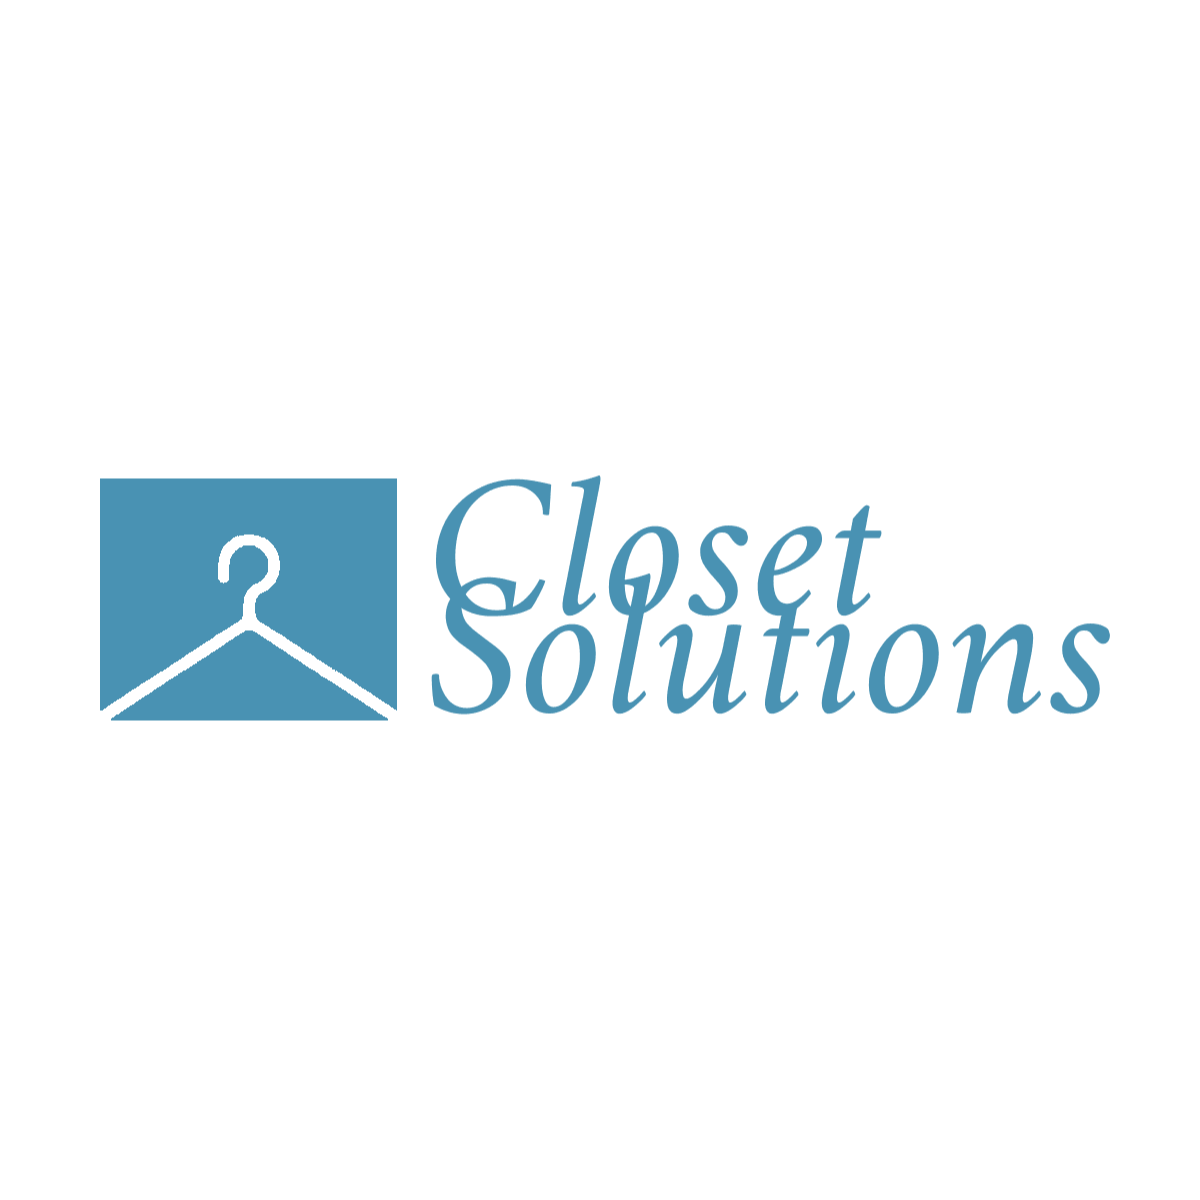 Closet Solutions - Knoxville, TN 37922 - (865)690-1244 | ShowMeLocal.com